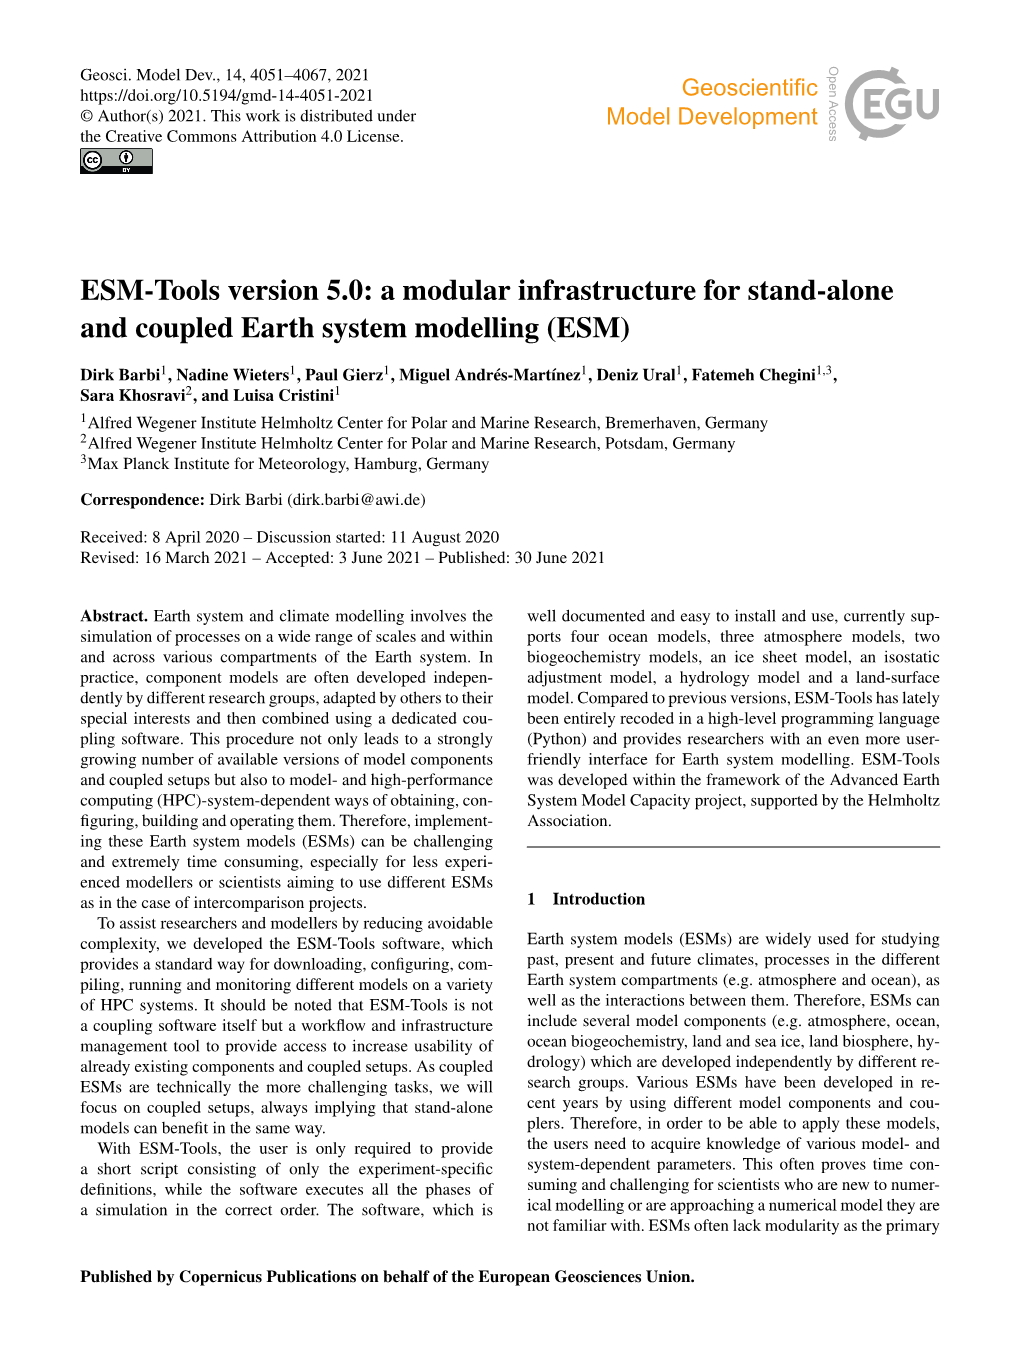 ESM-Tools Version 5.0: a Modular Infrastructure for Stand-Alone and Coupled Earth System Modelling (ESM)